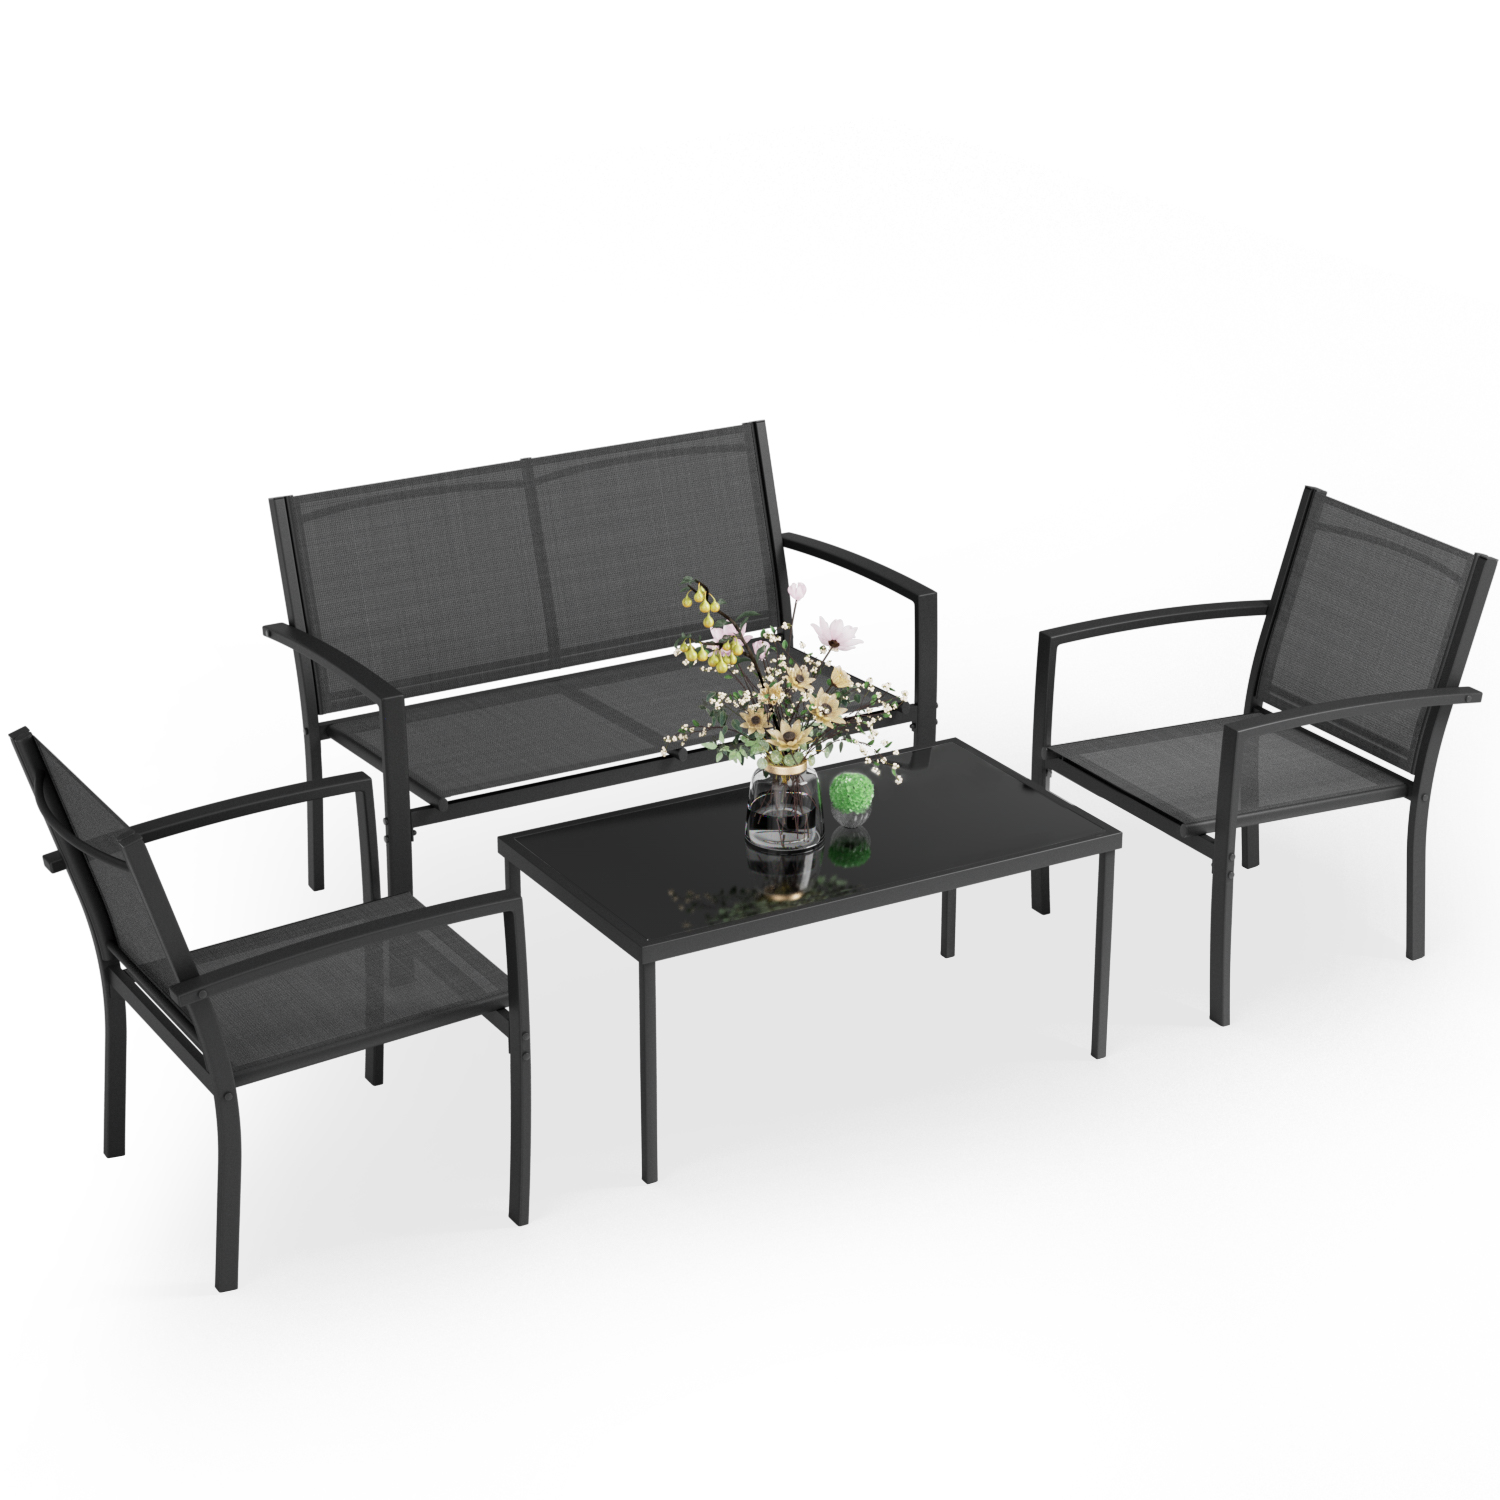 LACOO 4 Pieces Outdoor Furniture Set Patio Textilene Steel Conversation Set with Loveseat Tea Table for Lawn and Balcony, Black - image 3 of 8